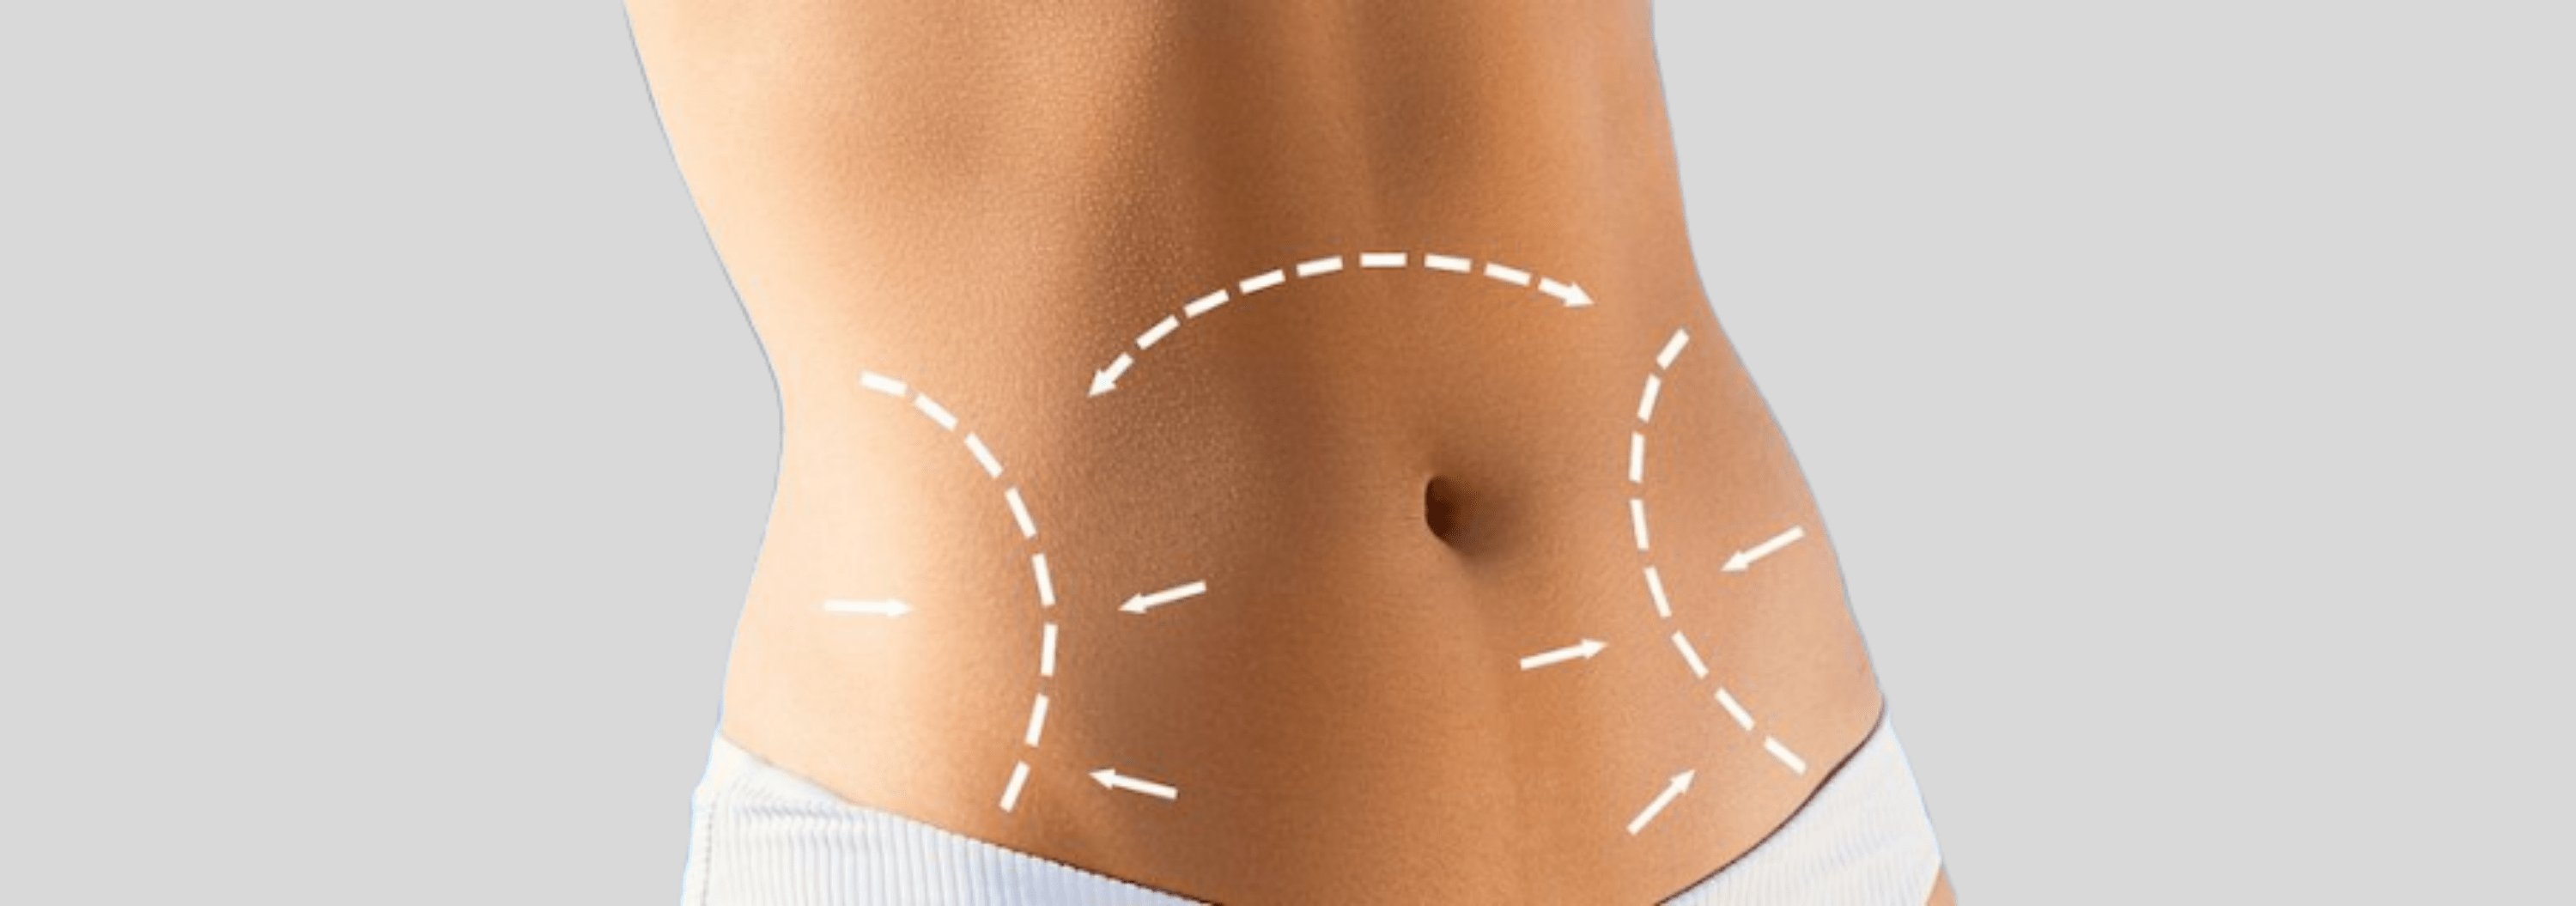 Overview About Tummy Lift Surgery